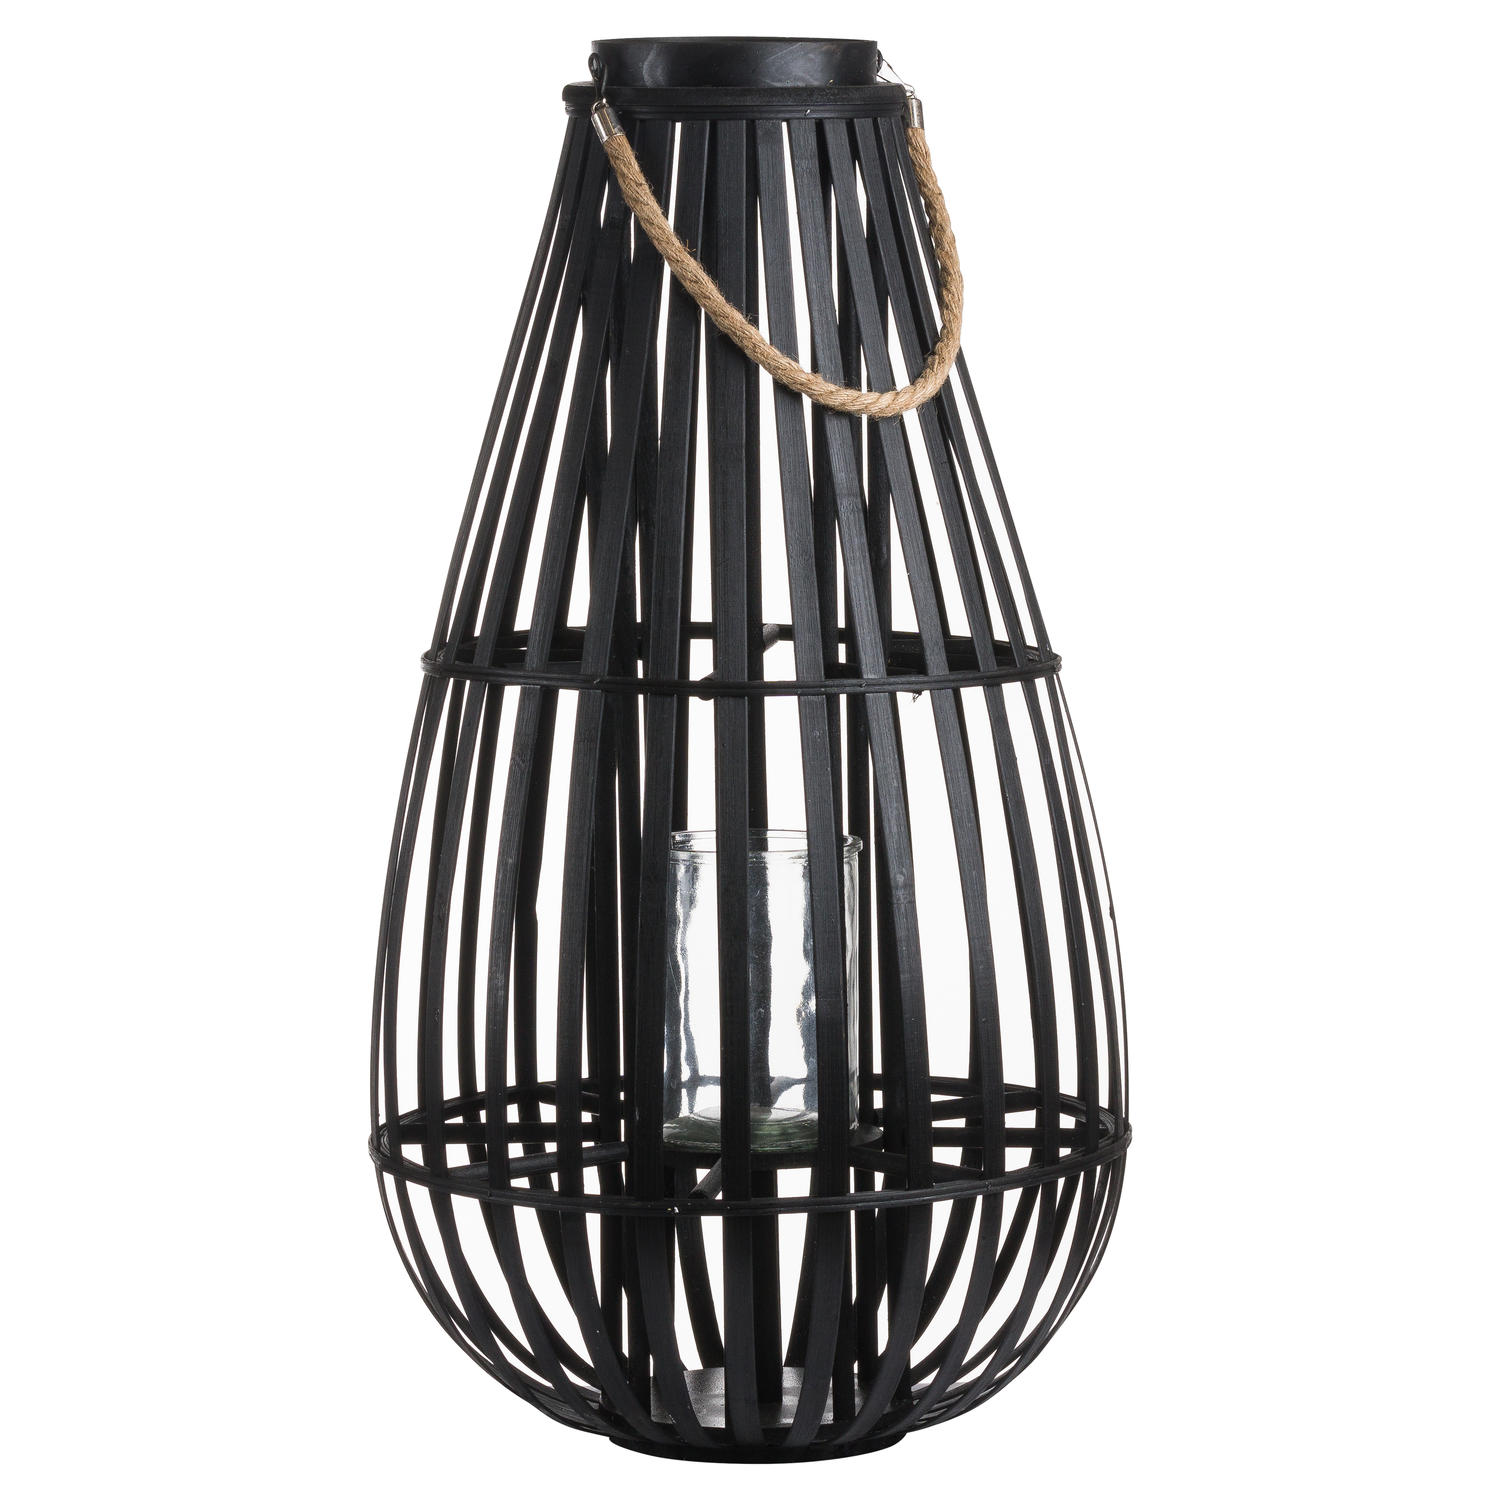 Large Floor Standing Domed Wicker Lantern With Rope Detail - Image 1